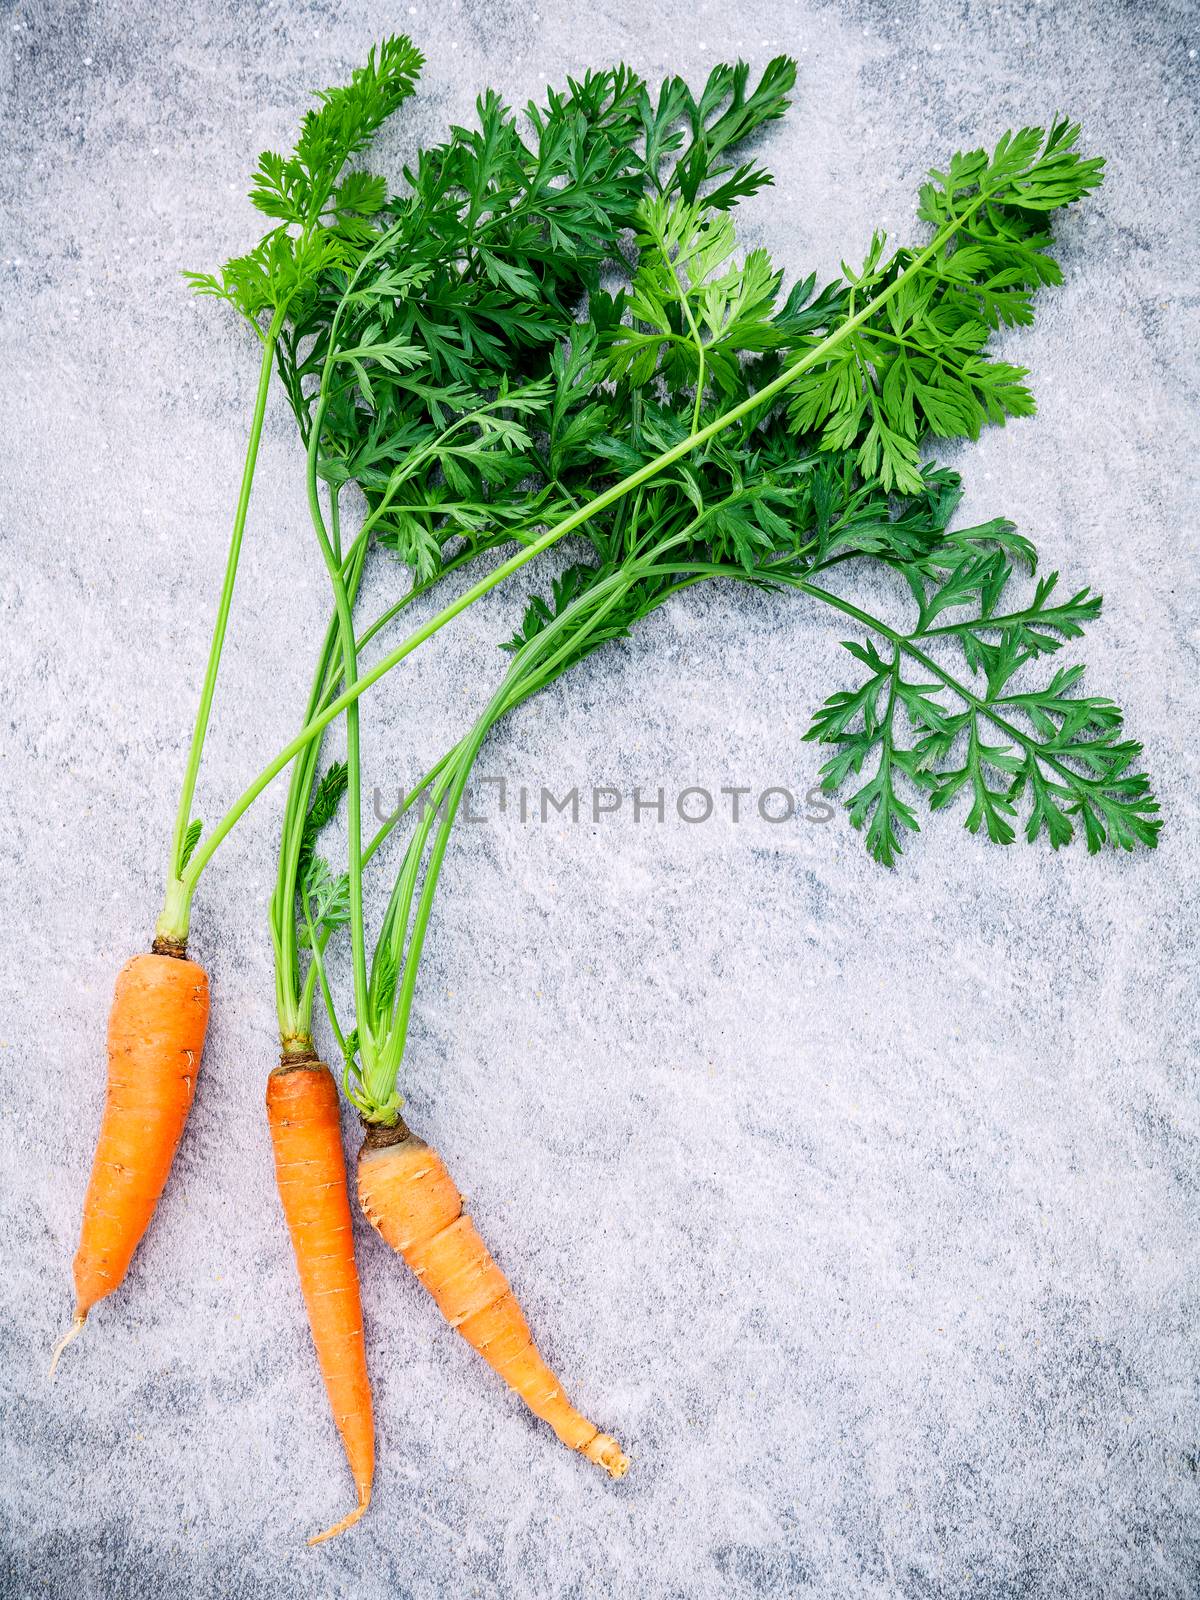 Fresh carrots bunch on wooden table. Raw fresh carrots with tail by kerdkanno